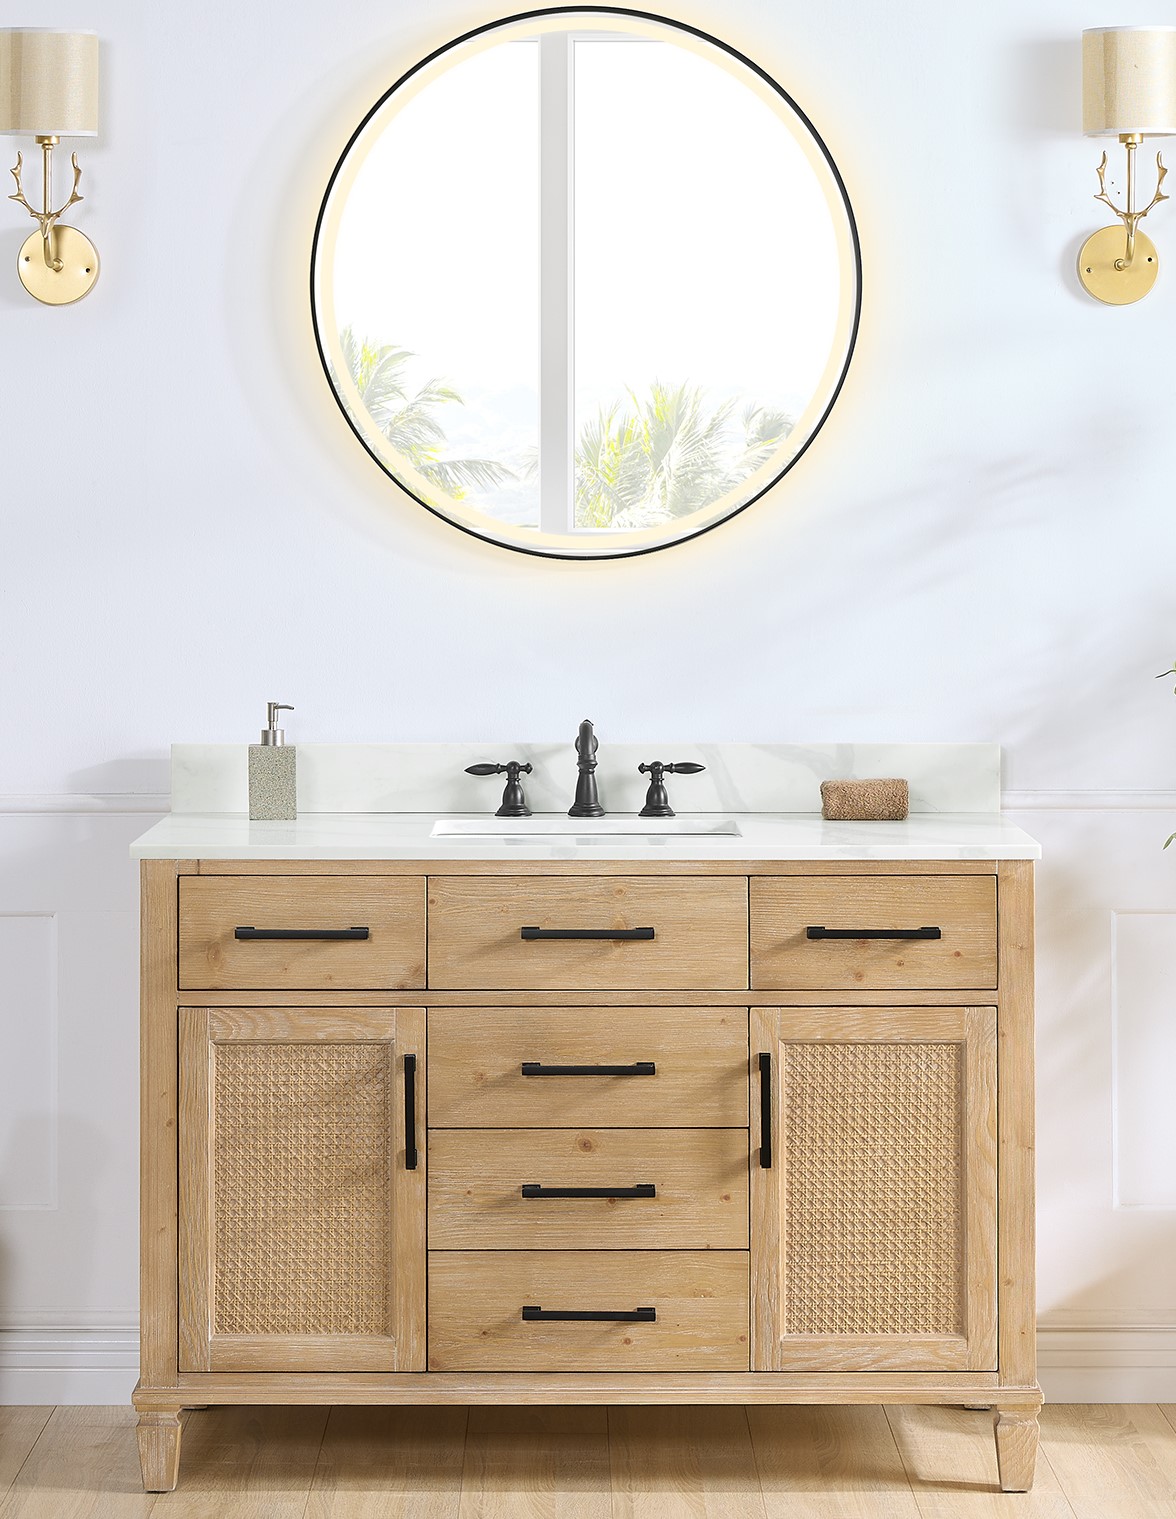 Issac Edwards 48" Single Bathroom Vanity in Weathered Fir with Calacatta White Quartz Stone Countertop with Mirror